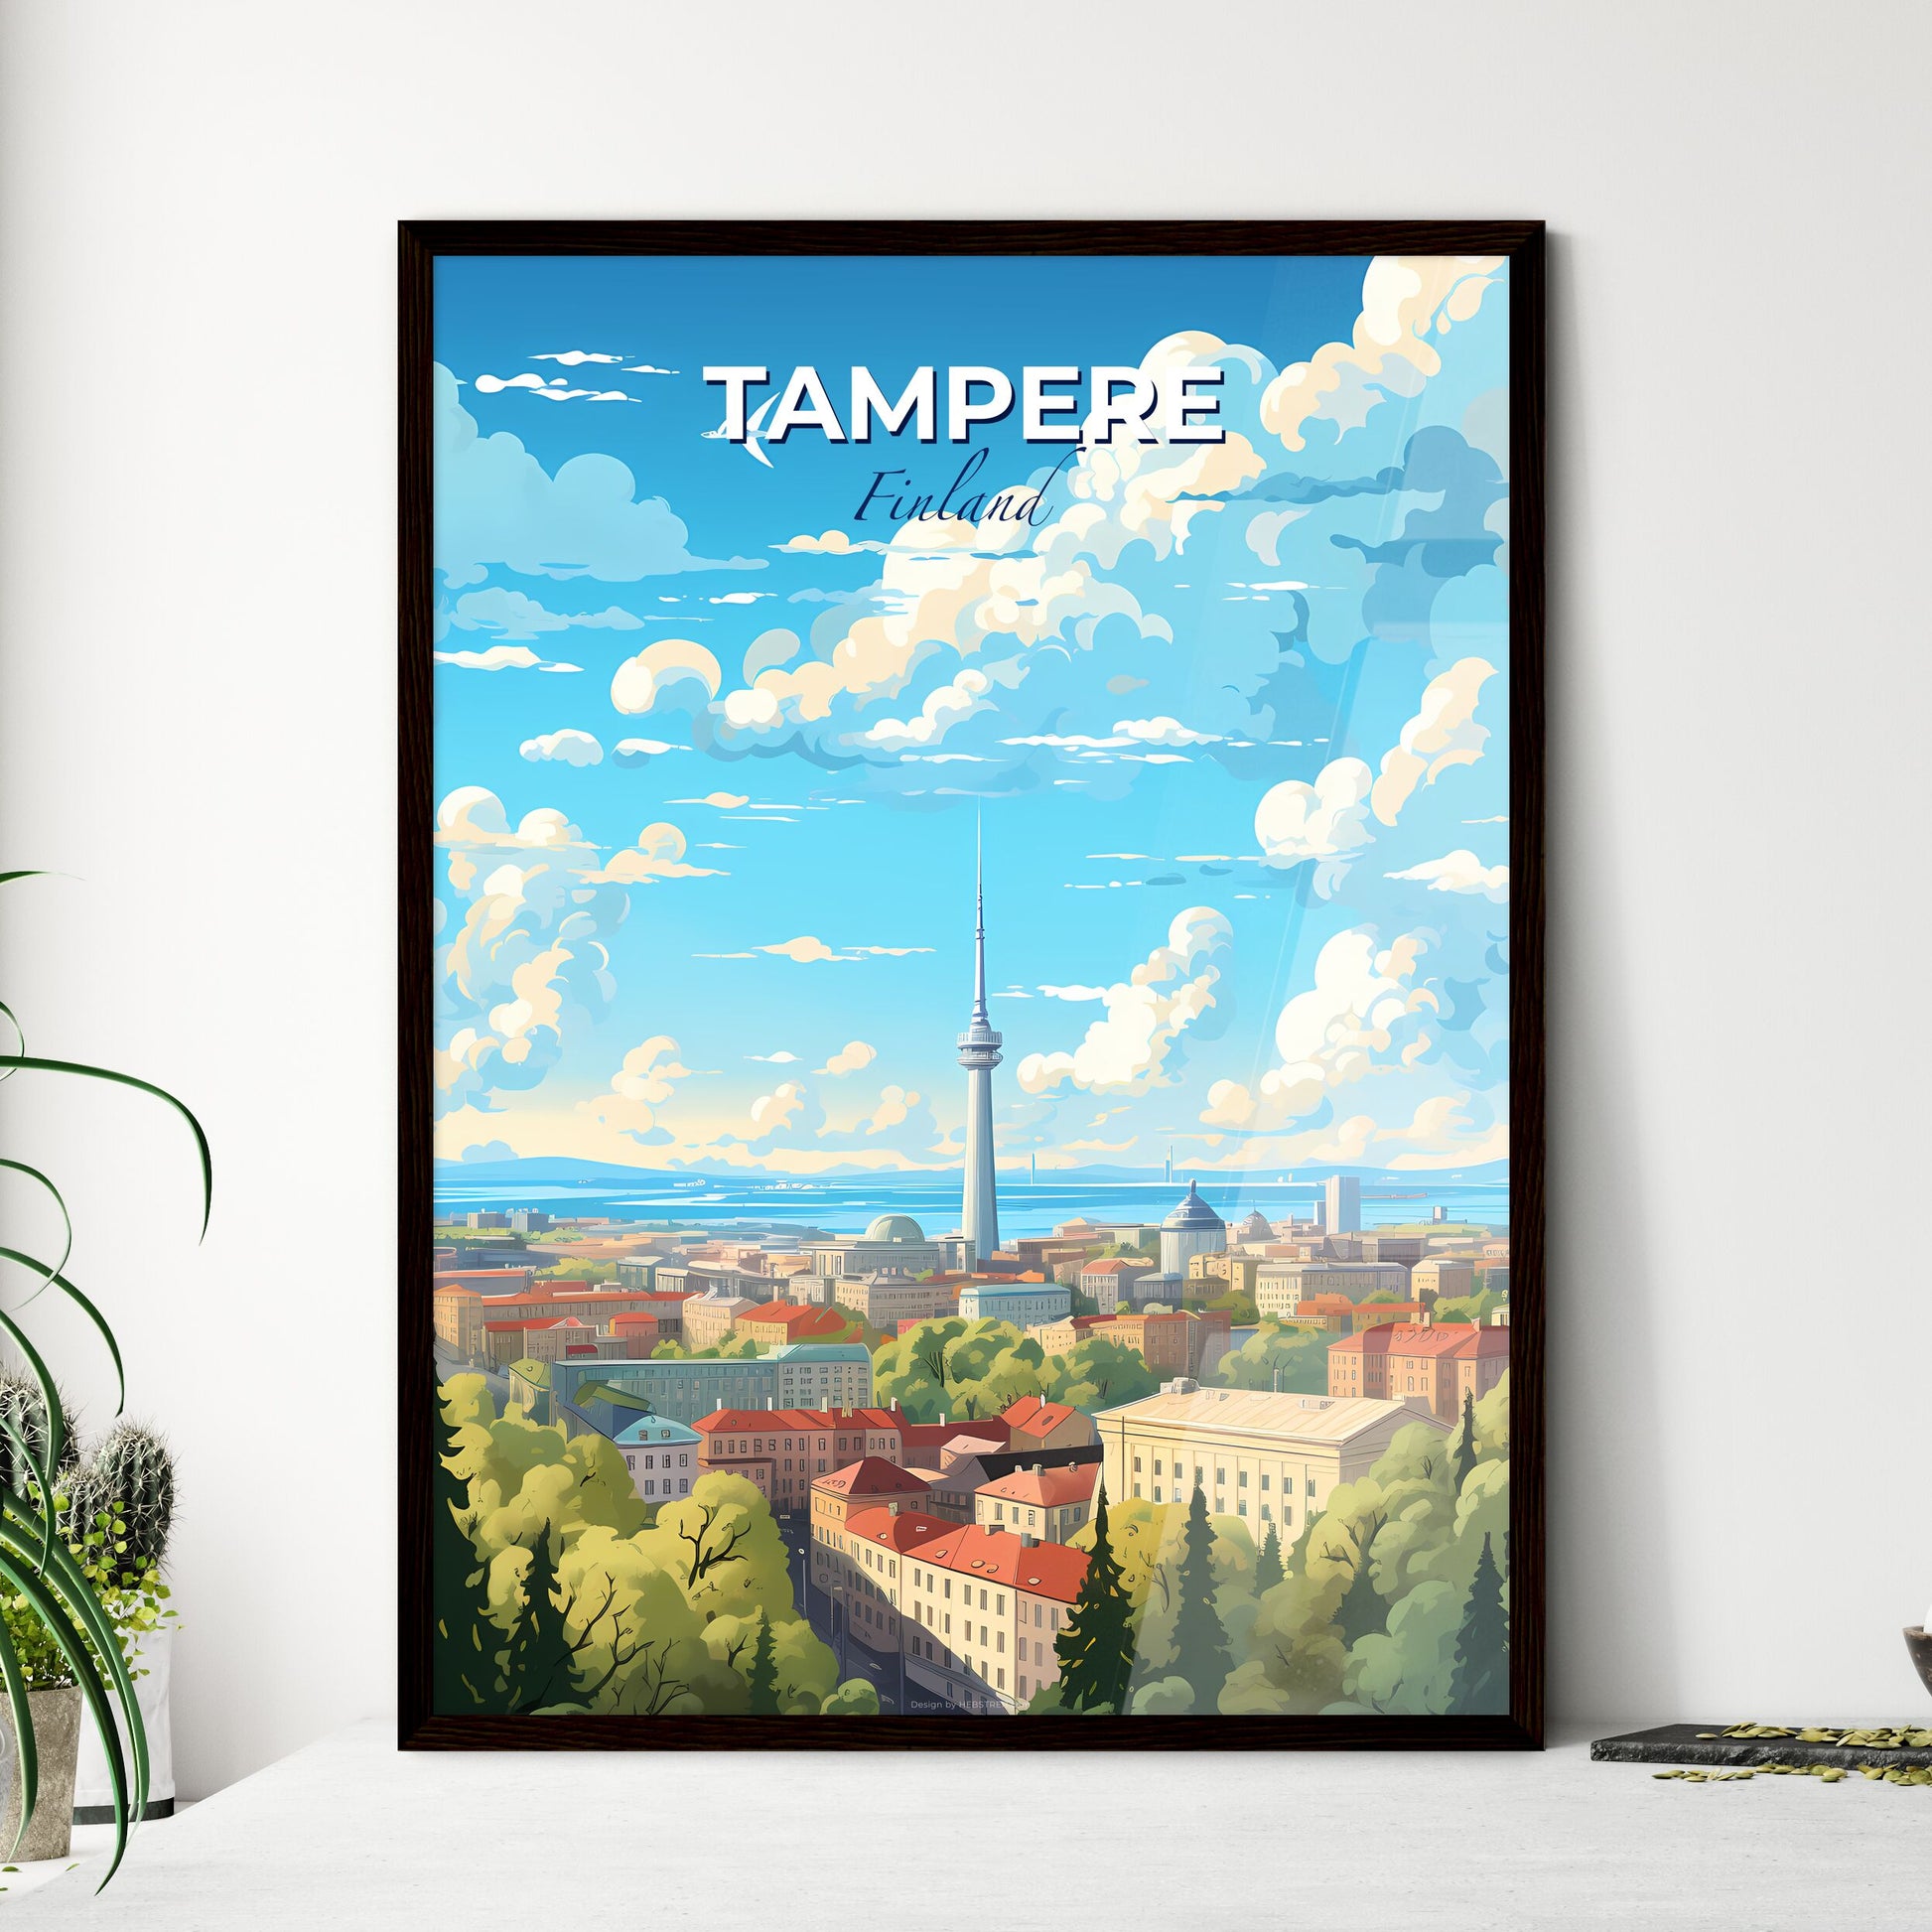 Tampere Finland Skyline - A City With A Tower And Buildings - Customizable Travel Gift Default Title